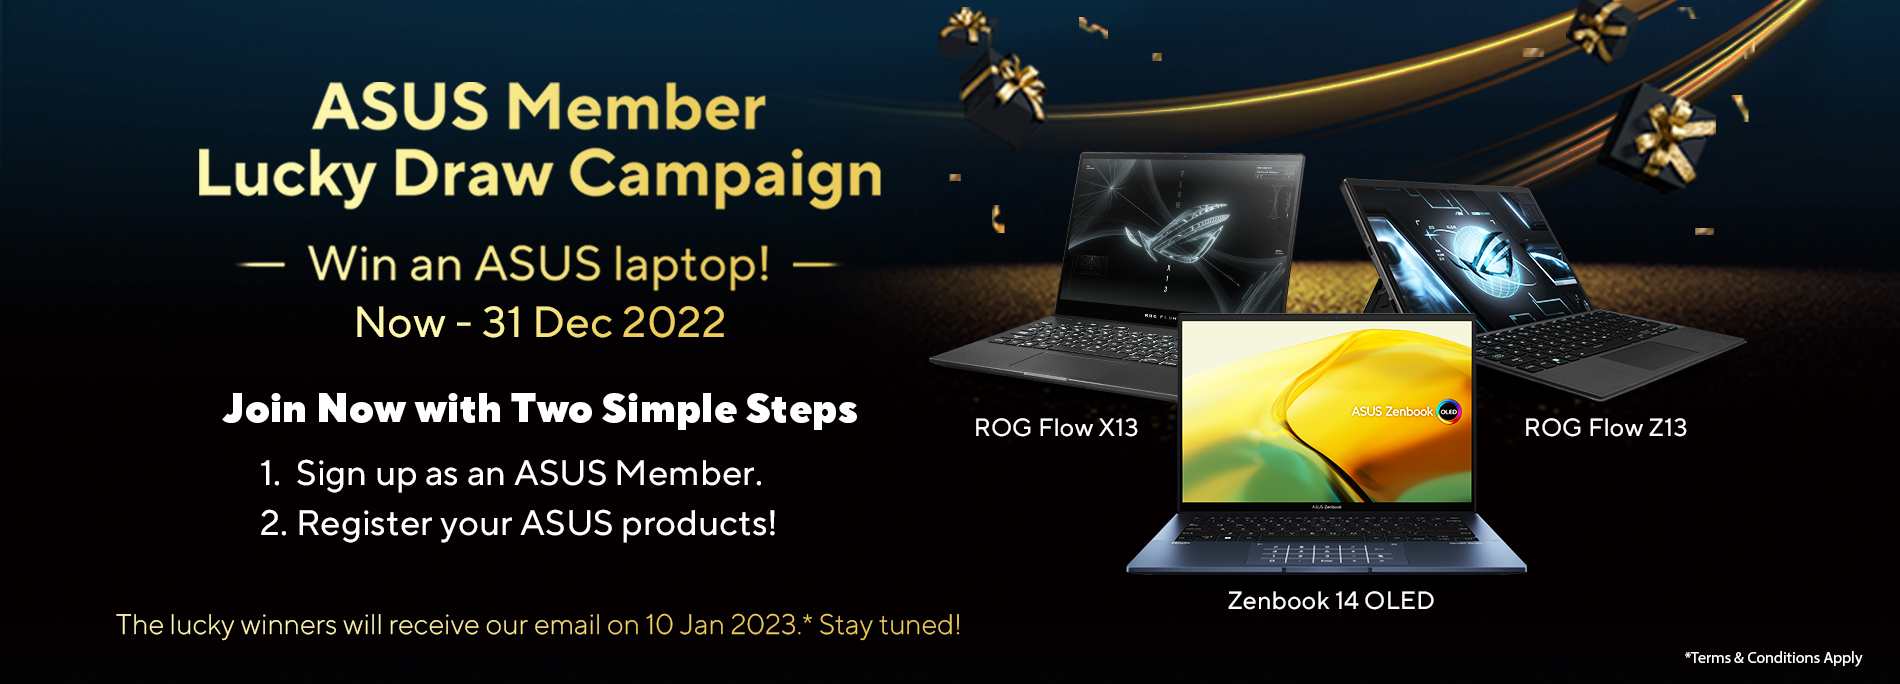 ASUS Member Lucky Draw Campaign (1 October - 31 December 2022)